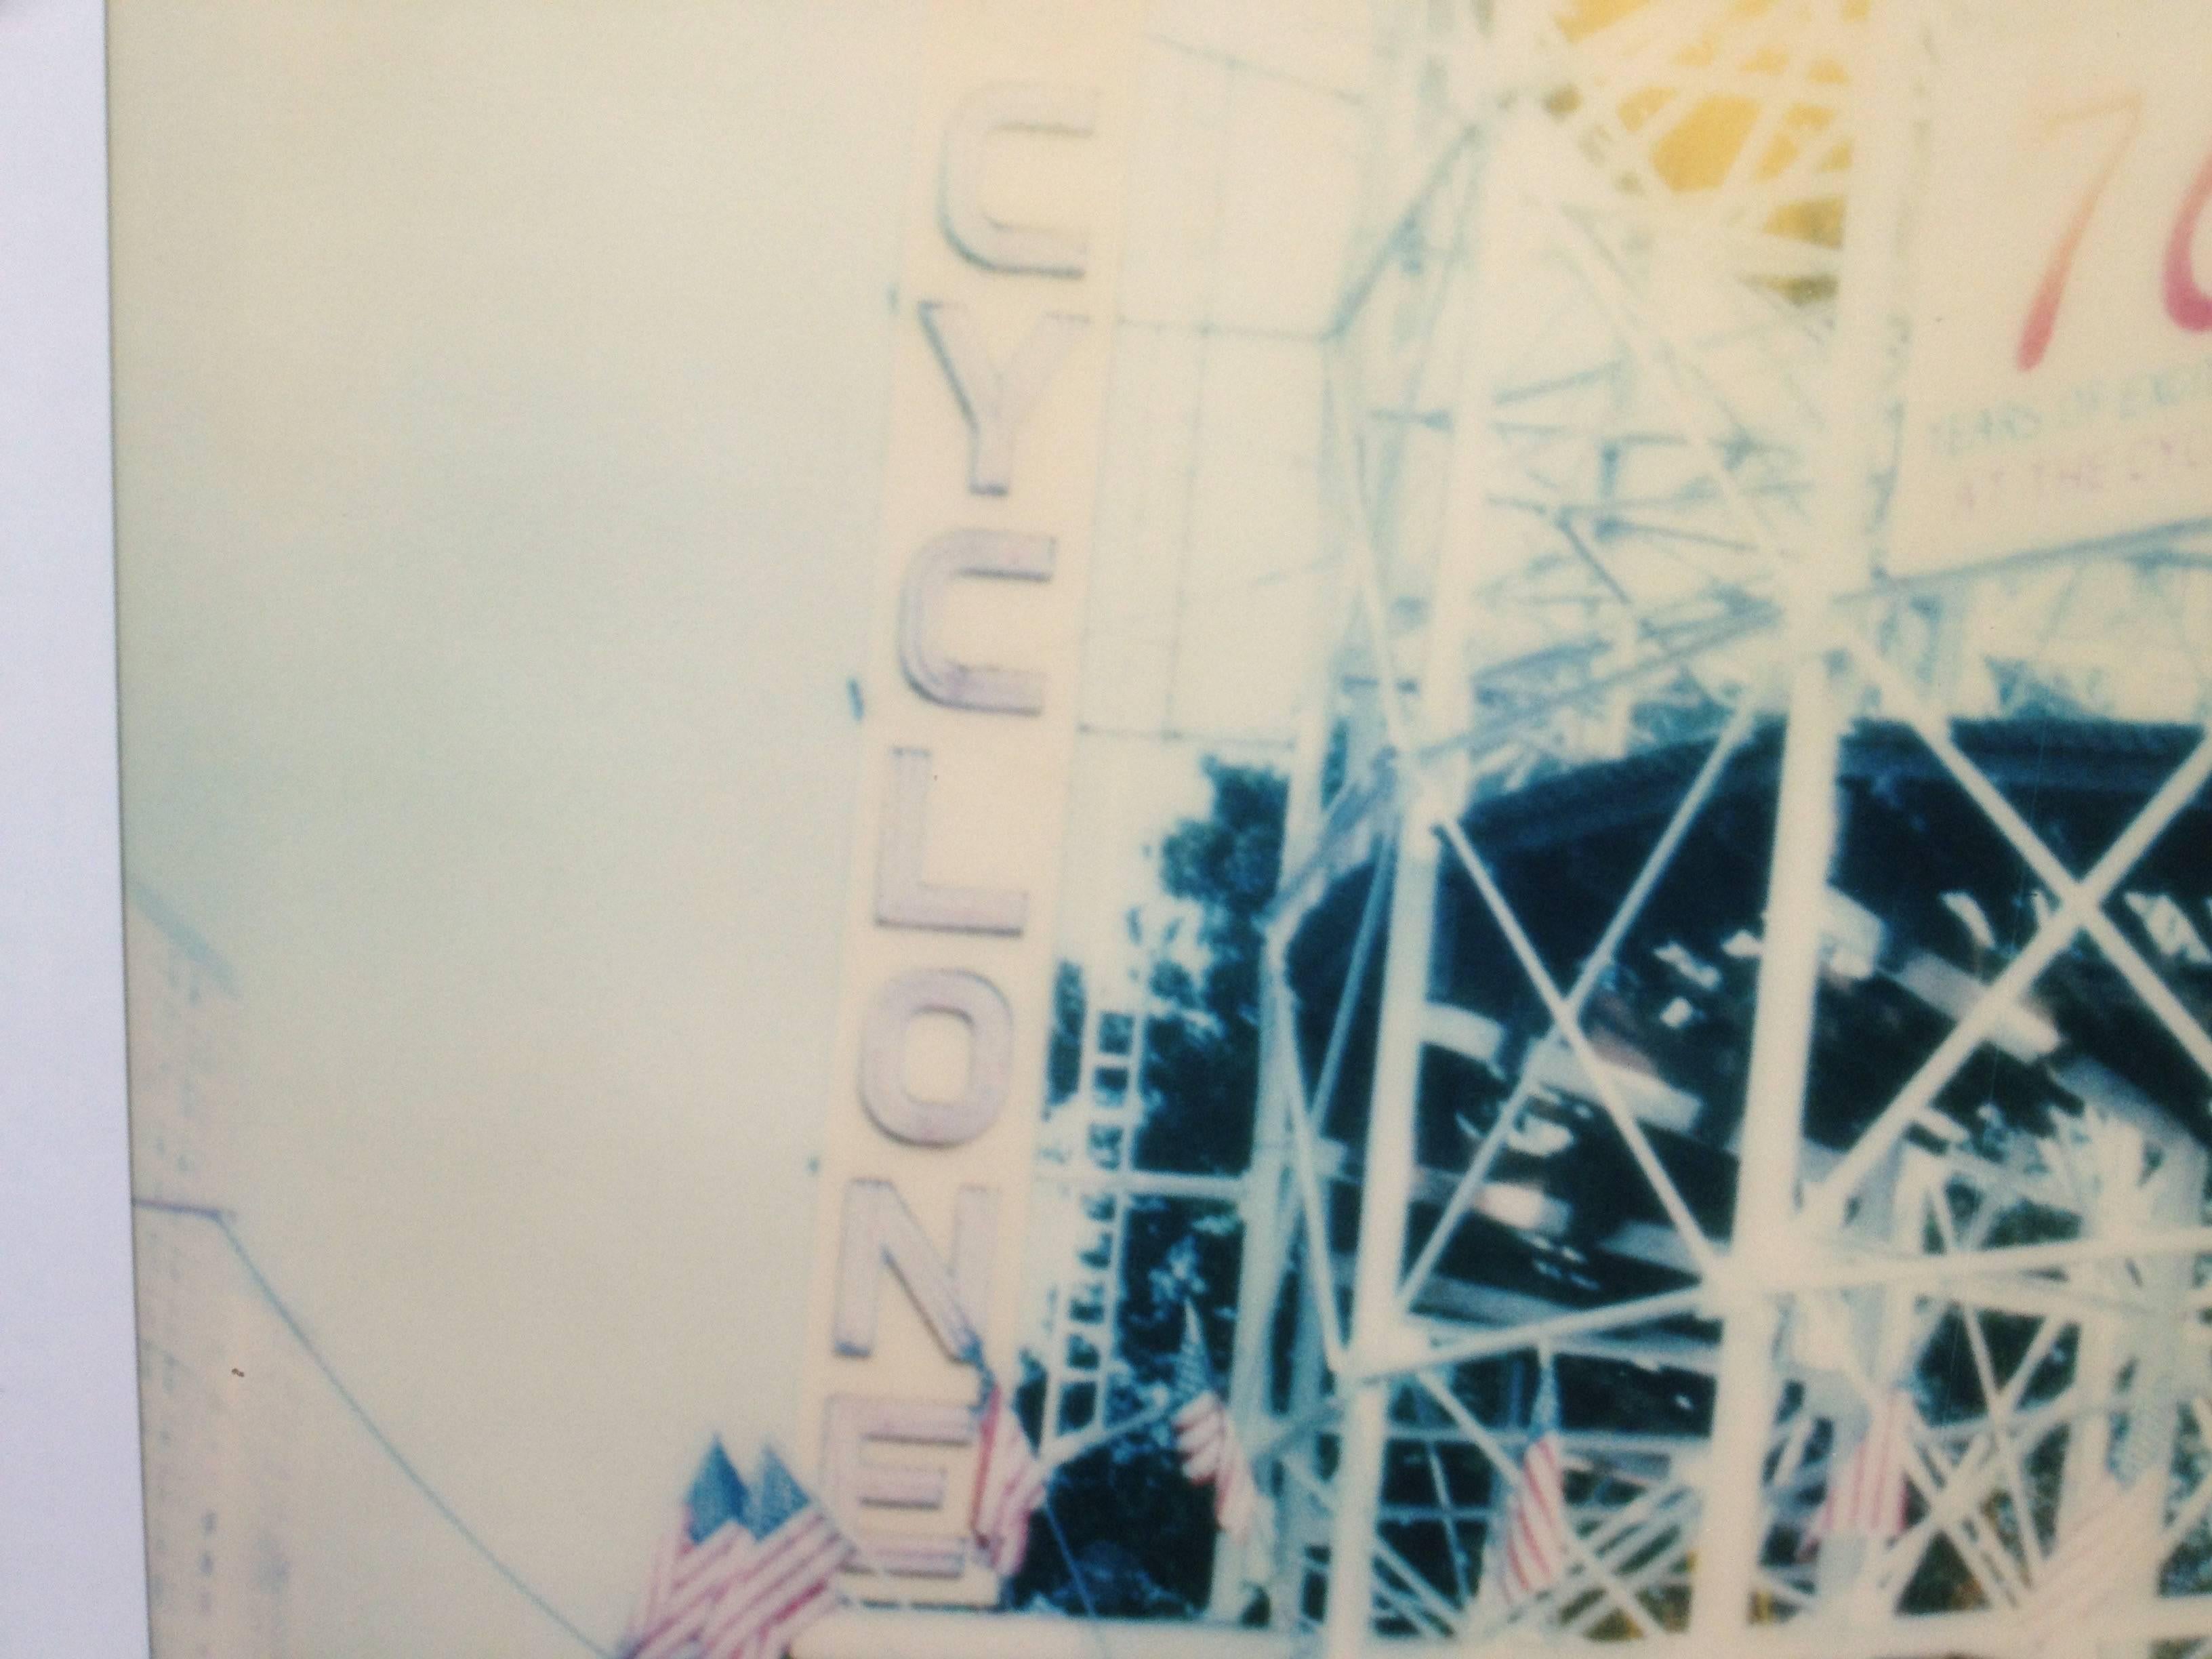 Cyclone from the movie Stay based on a Polaroid - Beige Color Photograph by Stefanie Schneider